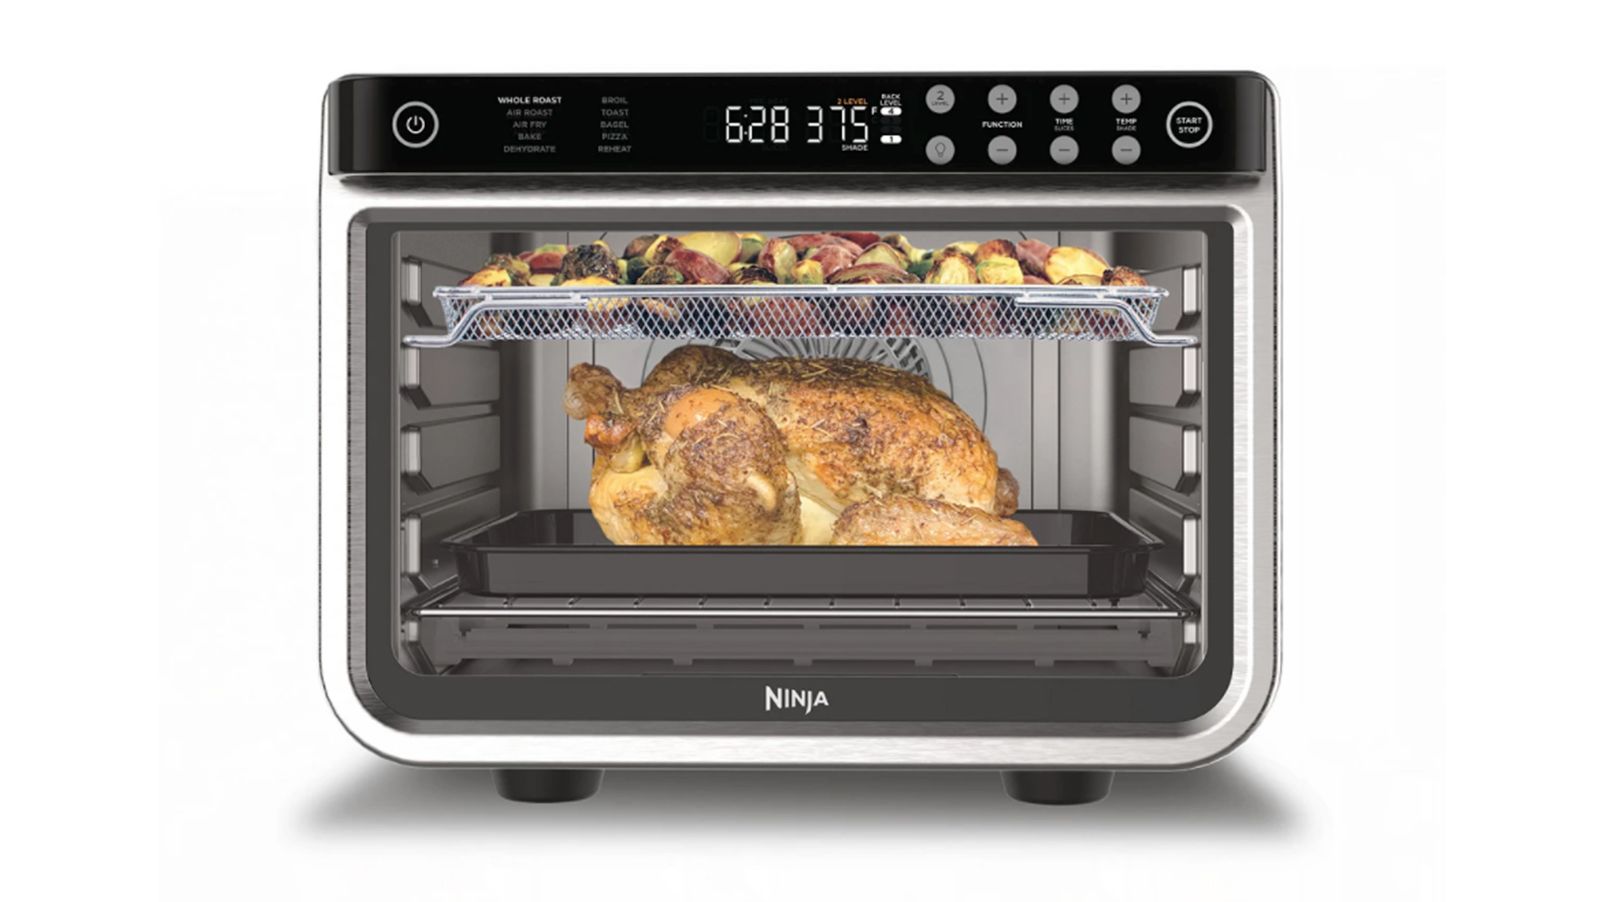 BlackFriday Gift Guide 2021:Comfee' 7-in-1 Air Fryer Toaster Oven